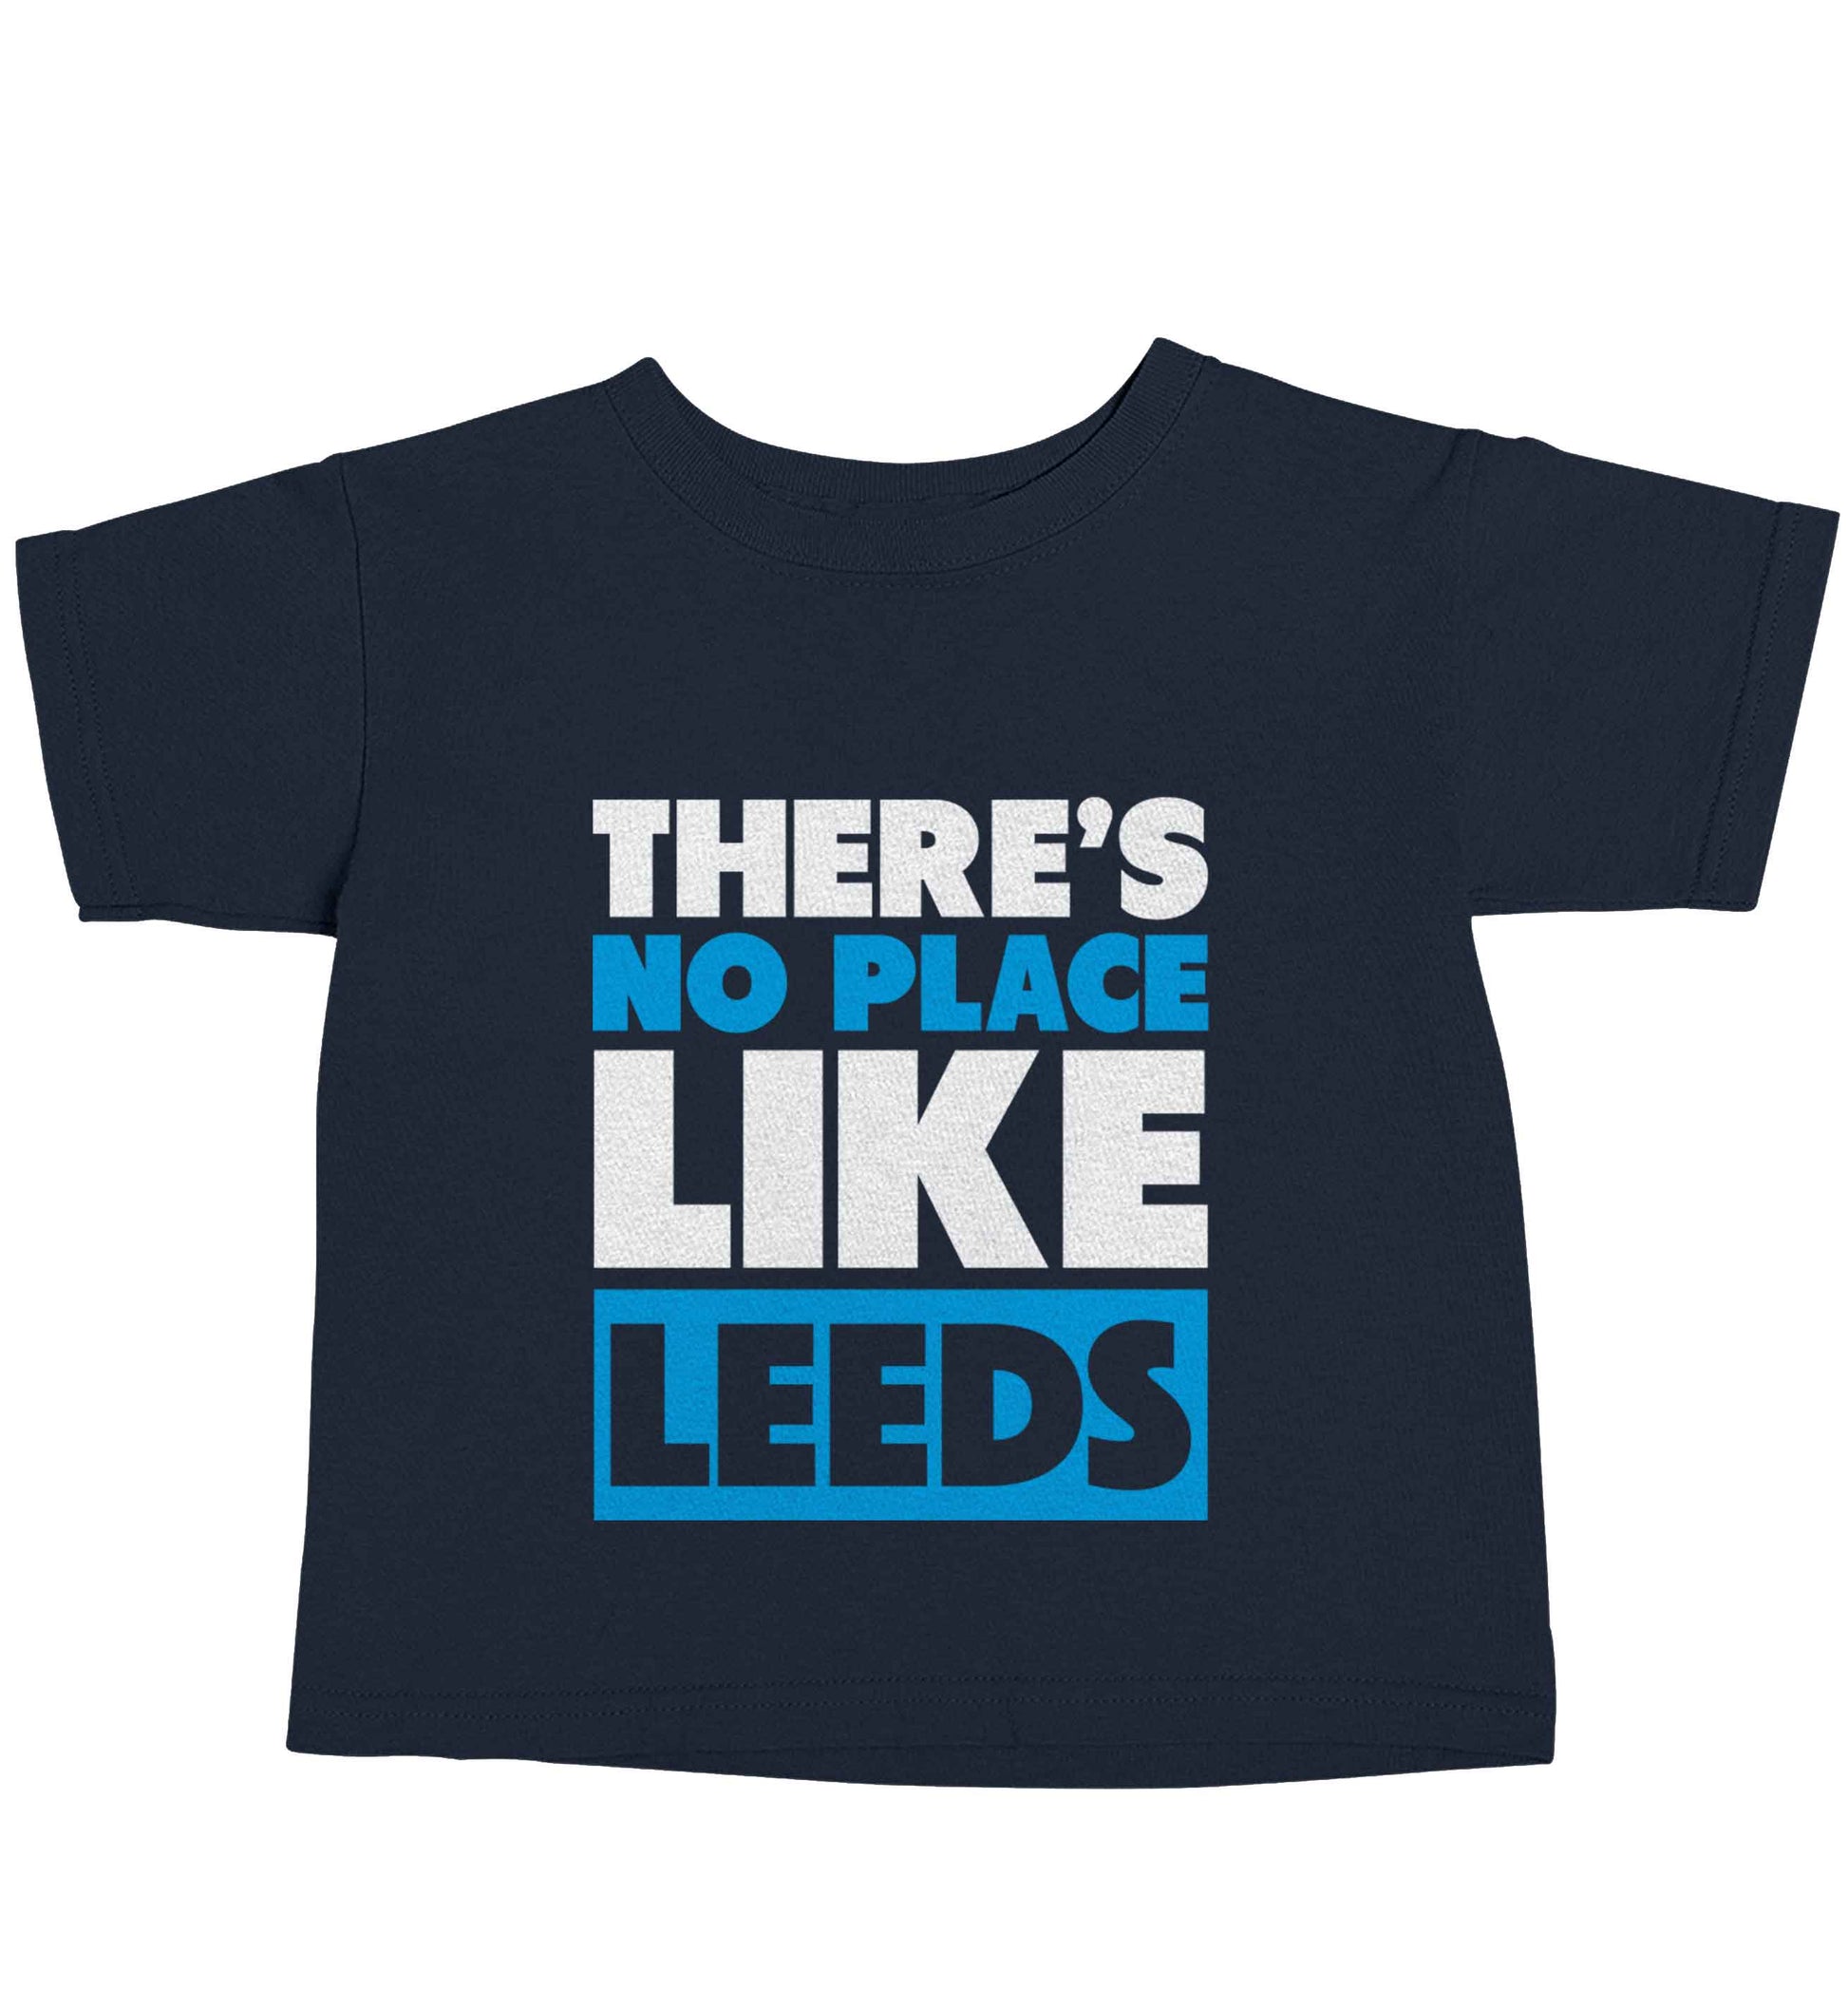 There's no place like Leeds navy baby toddler Tshirt 2 Years